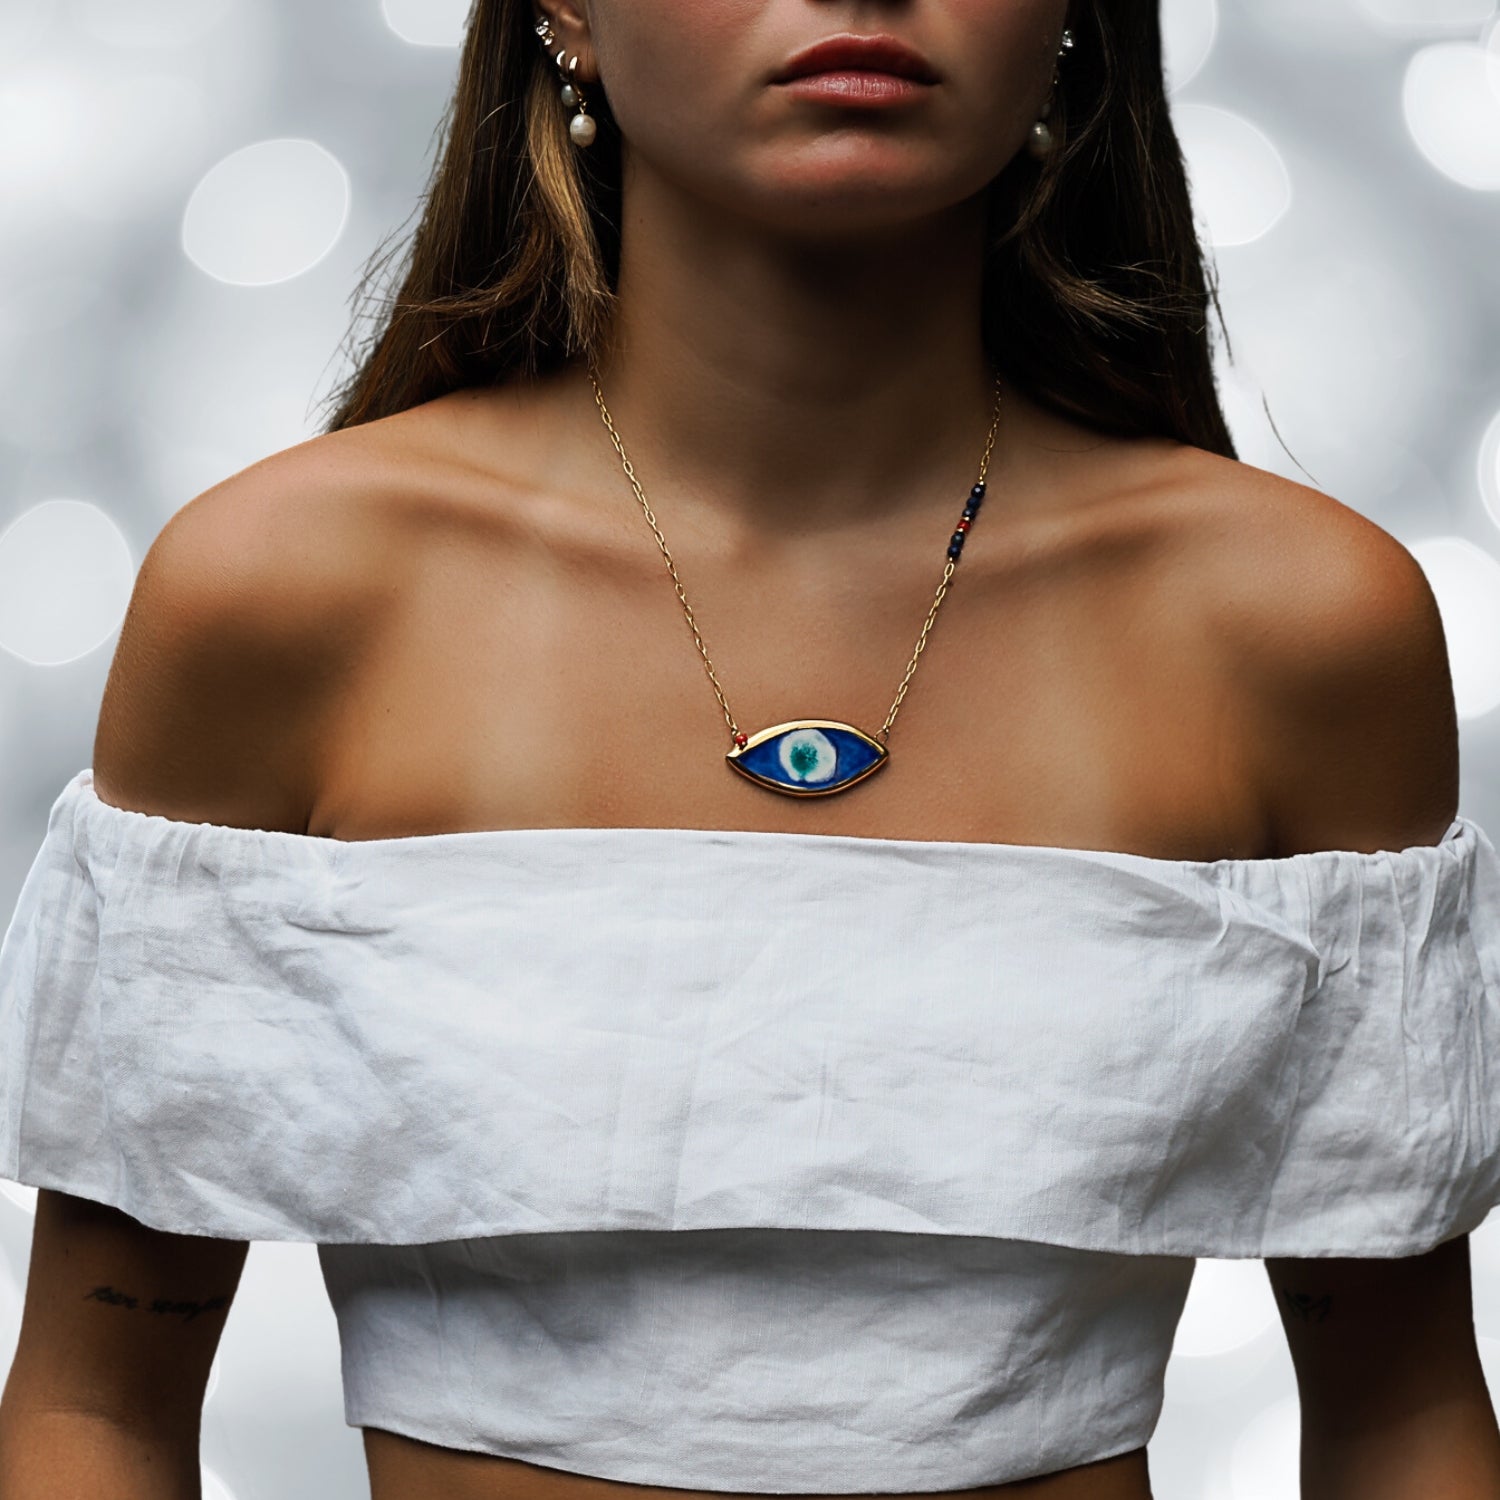 Artistic Jewelry - Model Wearing Lapis Lazuli and Coral Stones Necklace.